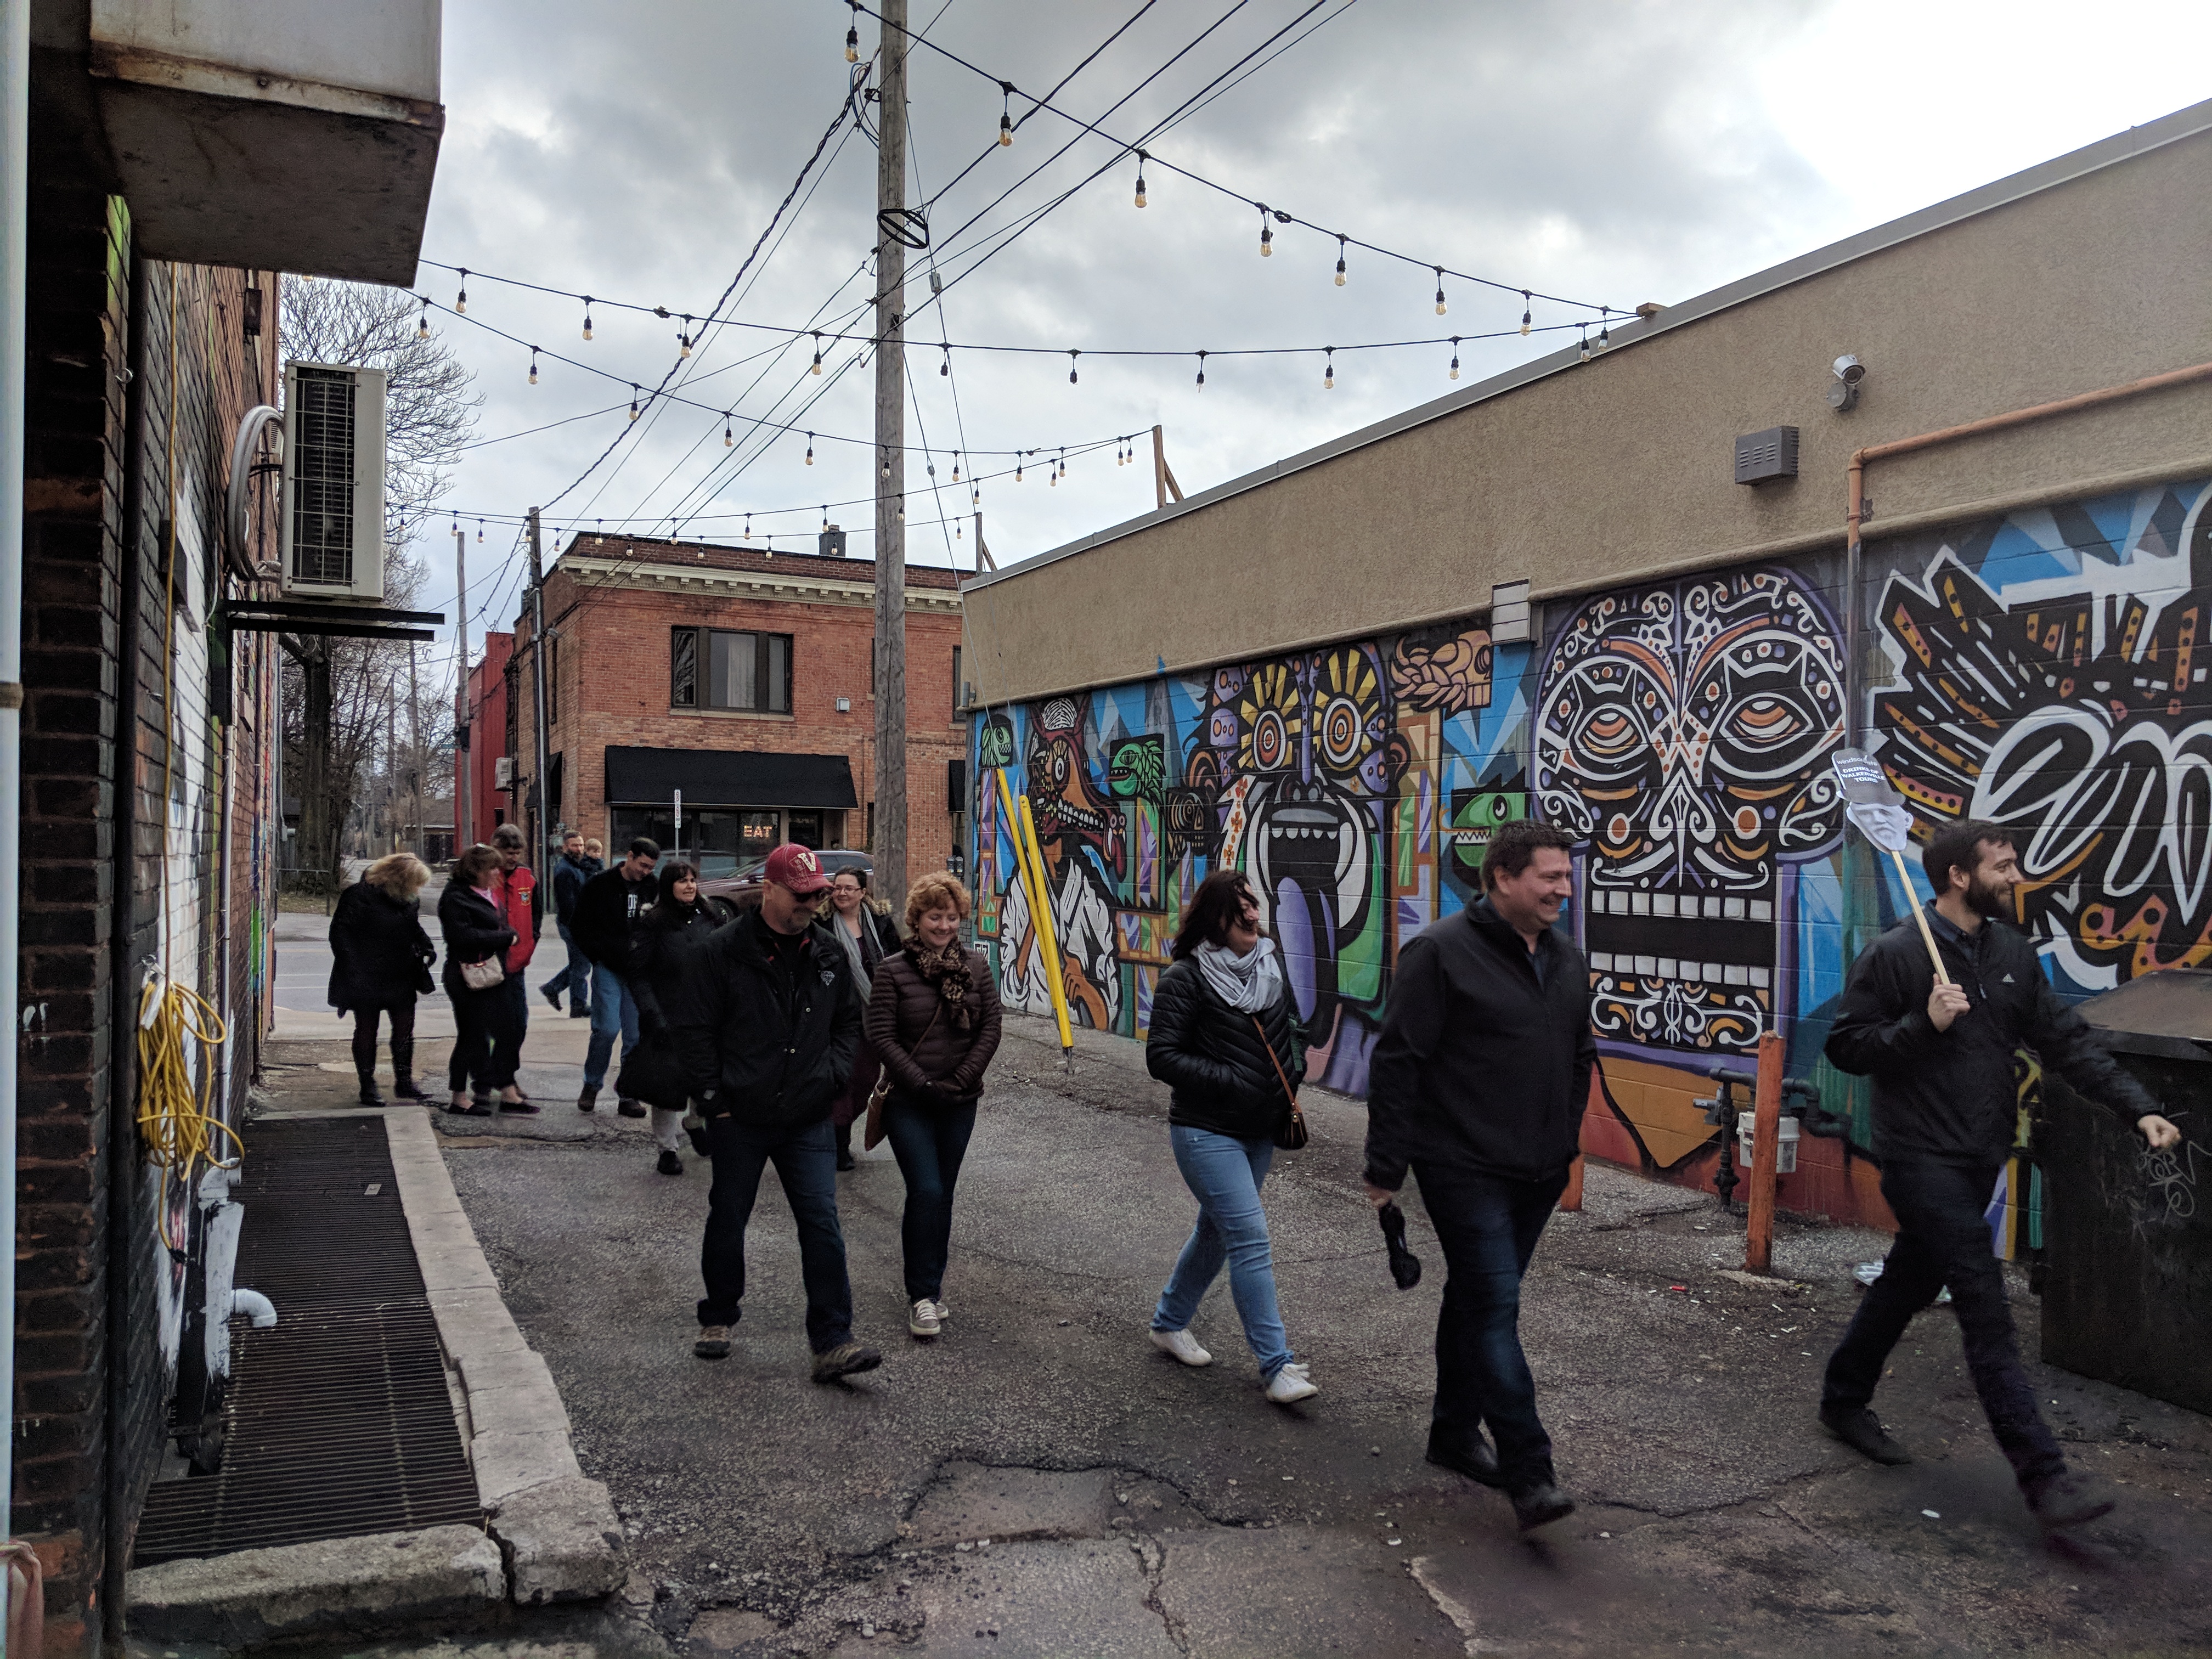 Taking in the street art on a Drinks of Walkerville Experience.